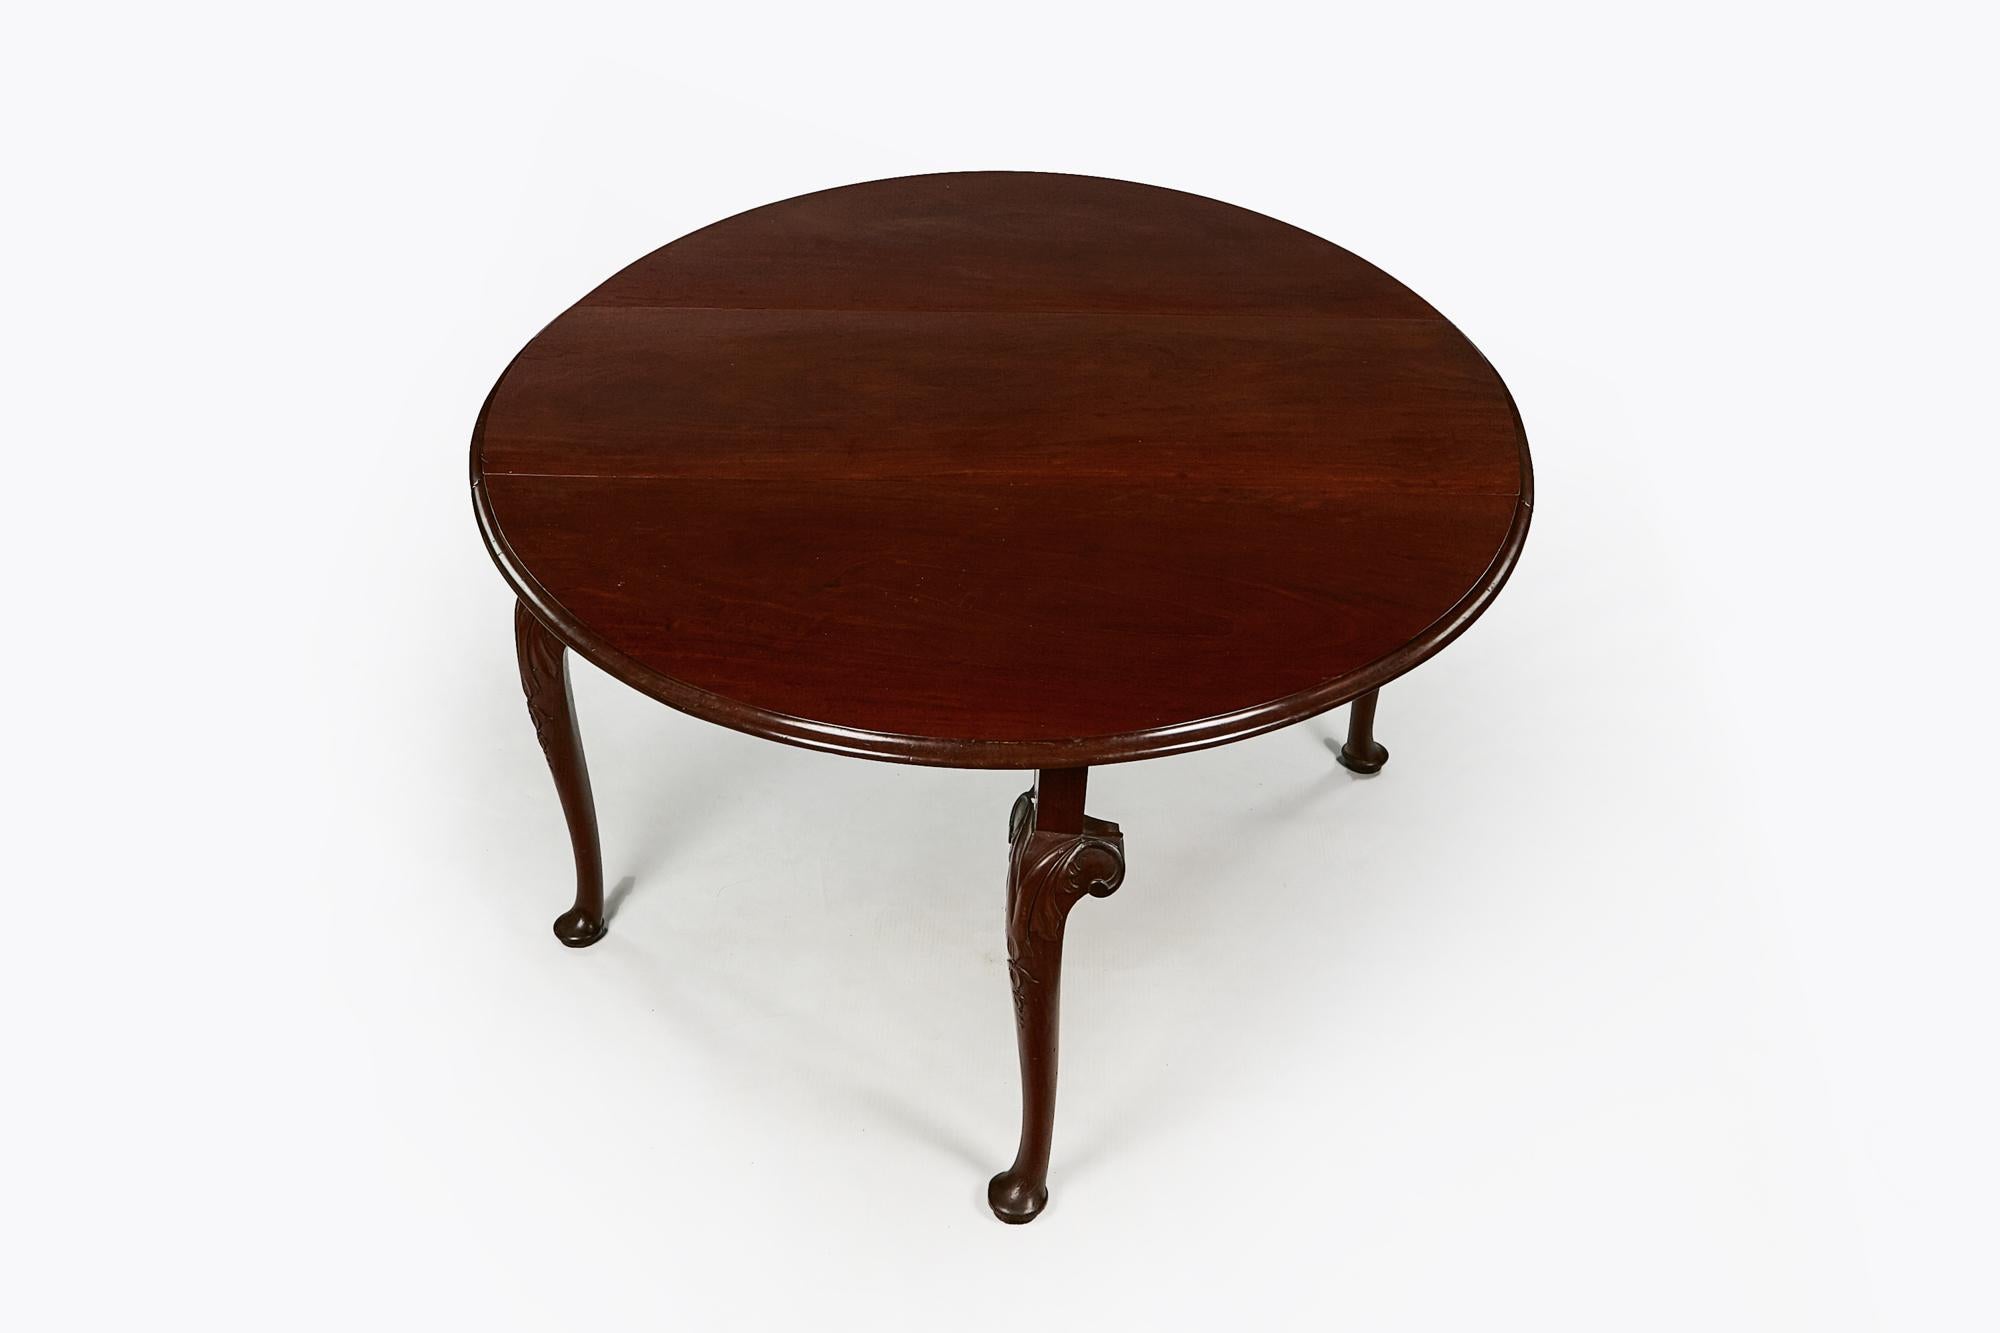 Early 19th century George III flame mahogany oval gate leg drop-leaf table. The molded top above shaped end rail supported on cabriole leg with carved acanthus and trailing bell husk motif detail terminating on pad foot.